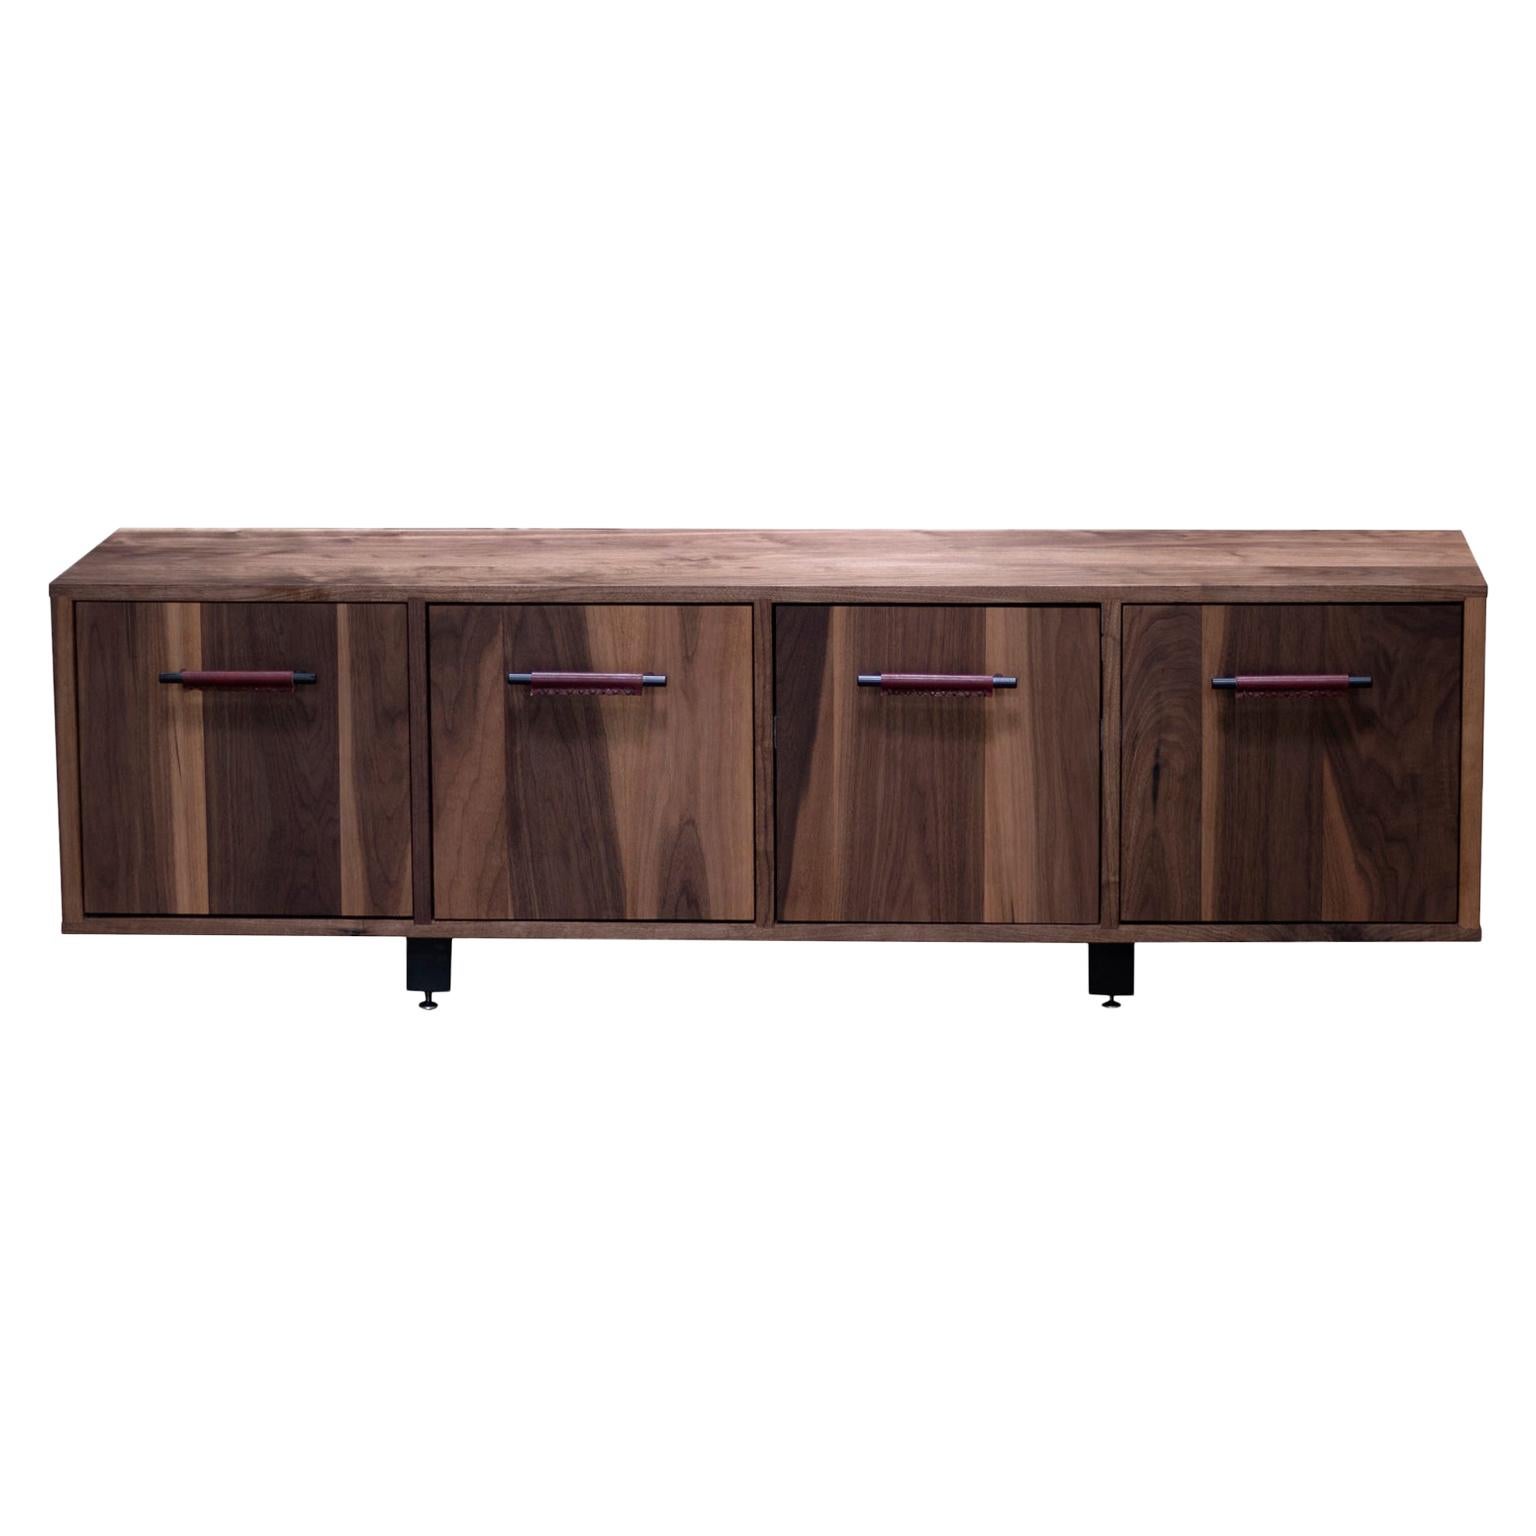 Walnut Belmont Cabinet with Oxblood Leather Pull Handles For Sale